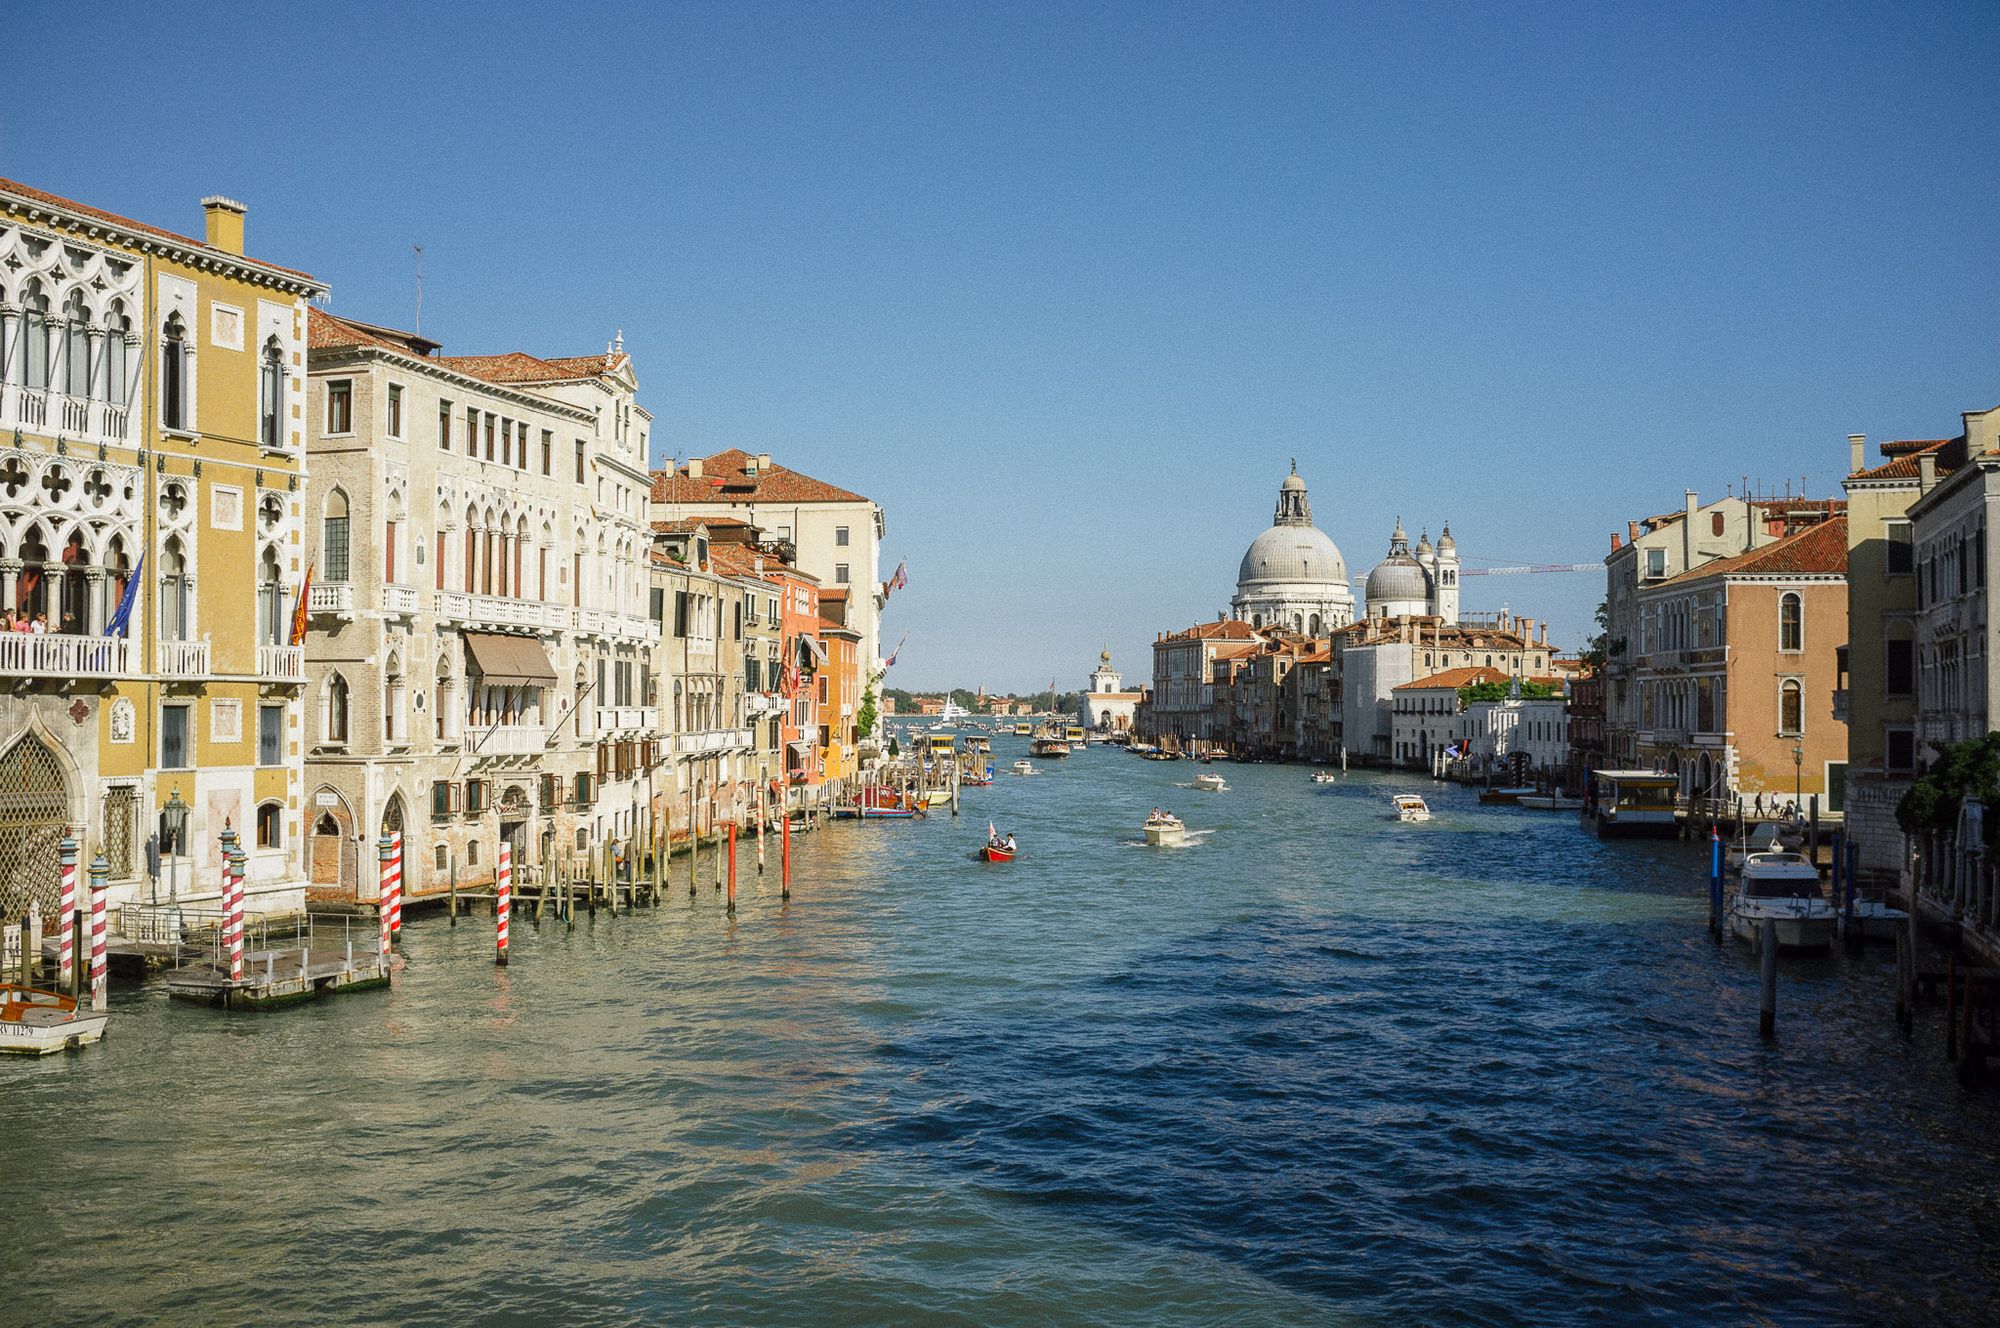 A view down the grand canal in Venice towards a cathedral.